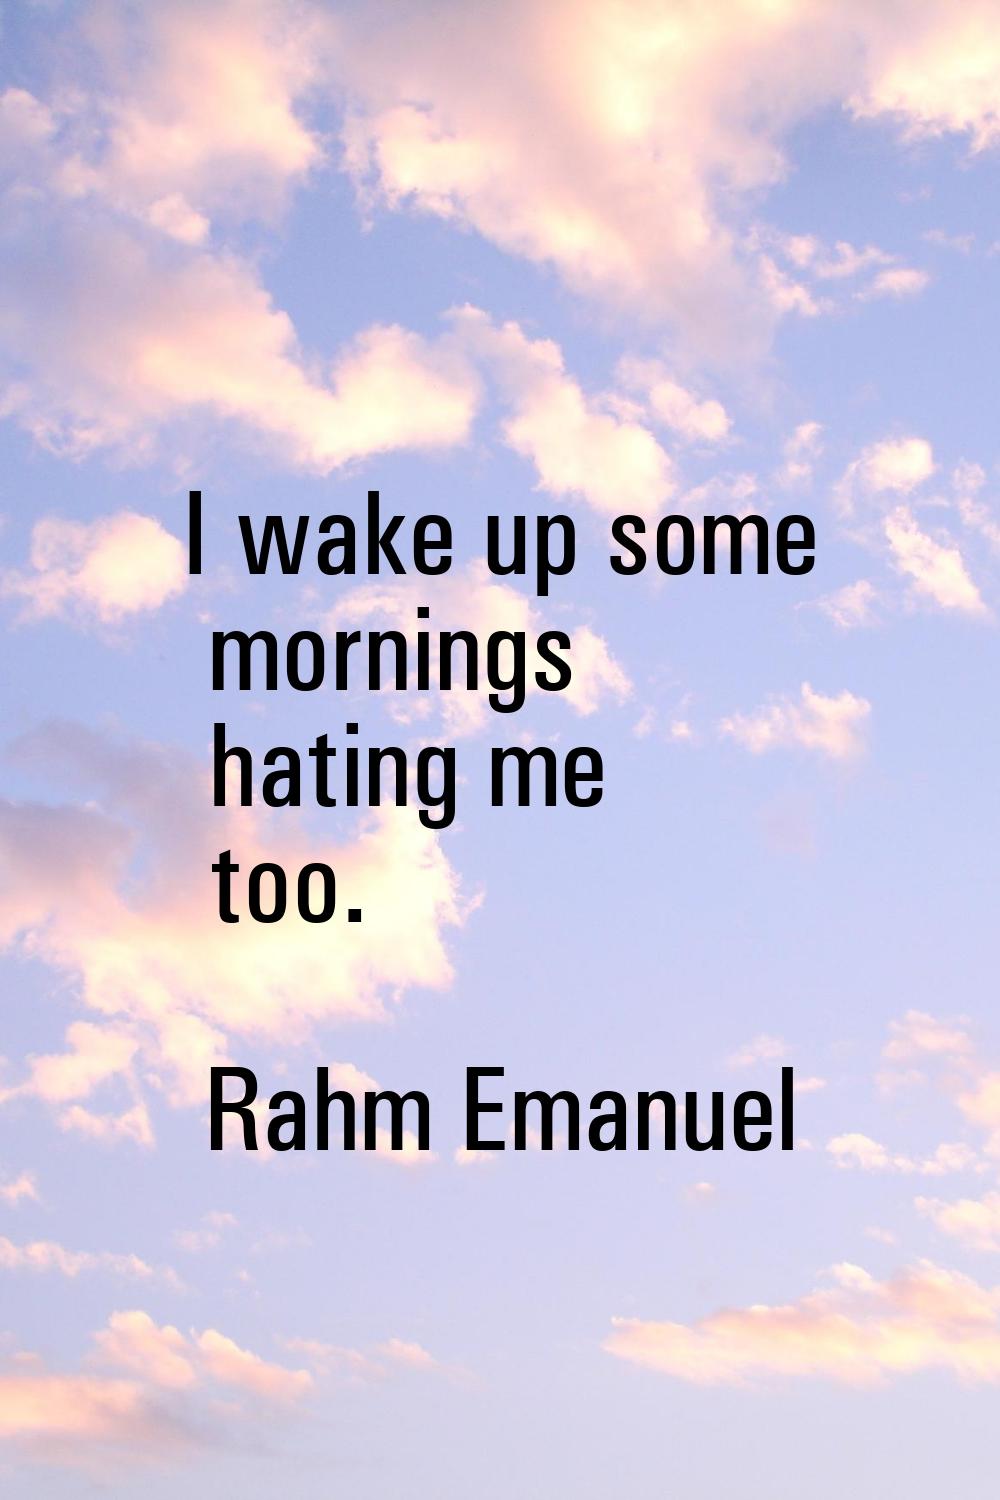 I wake up some mornings hating me too.